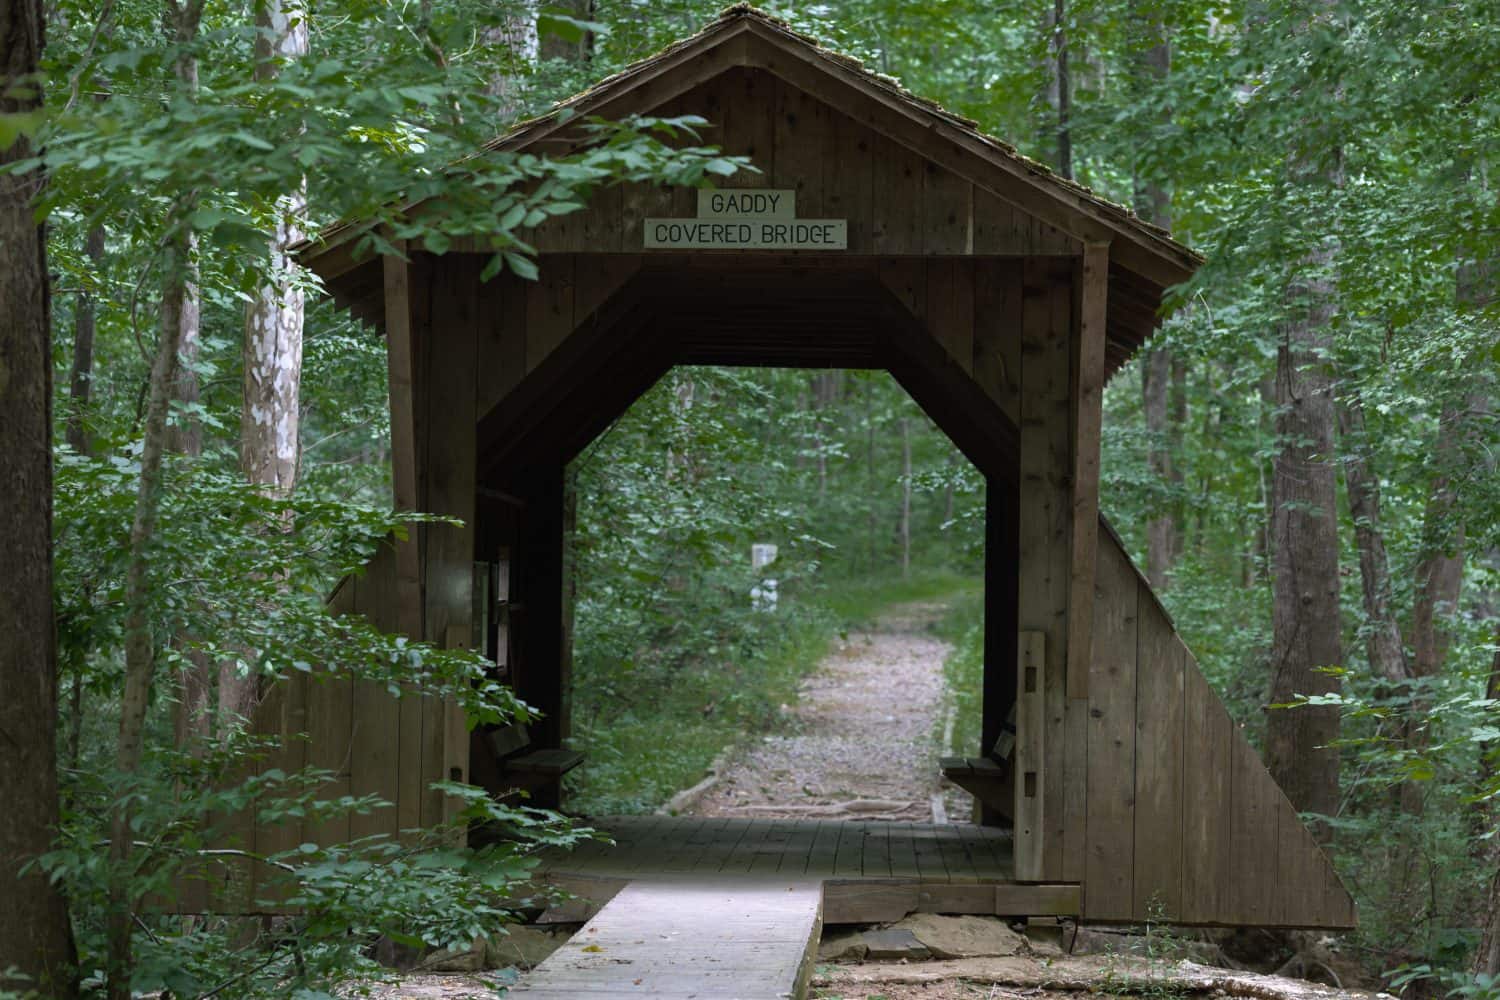 A beautiful area that draws fishermen of all ages. The Gaddy Covered bridge gives an extra attractionon to the Pee Dee National Wildlife refuge with benches for sitting and relaxing.